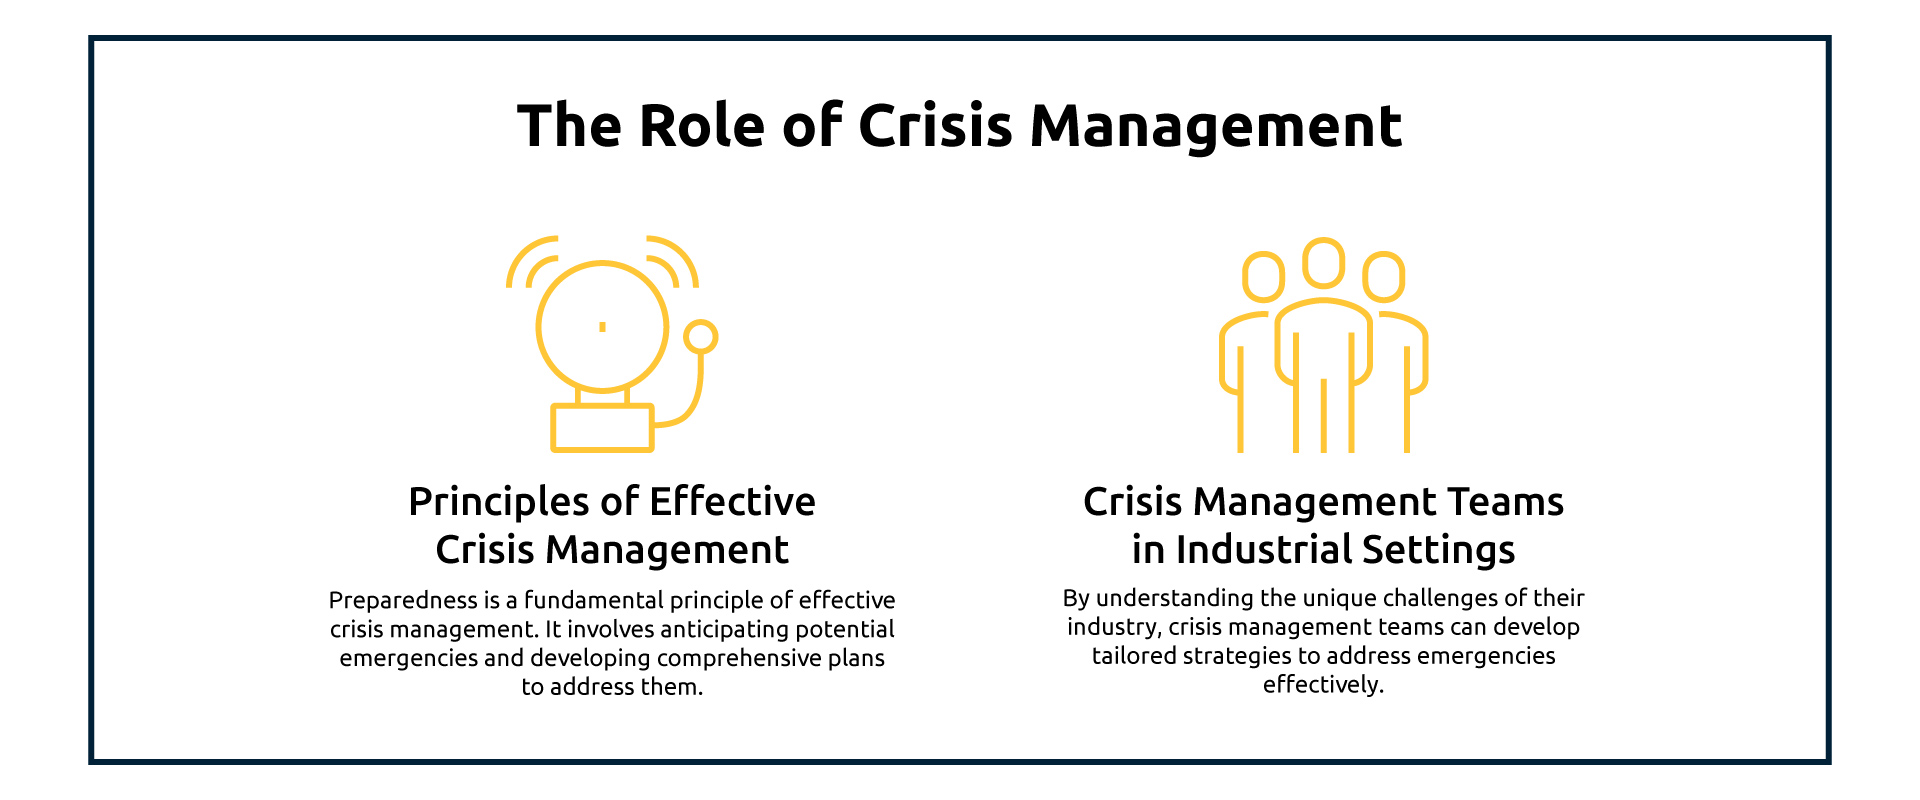 The Role of Crisis Management